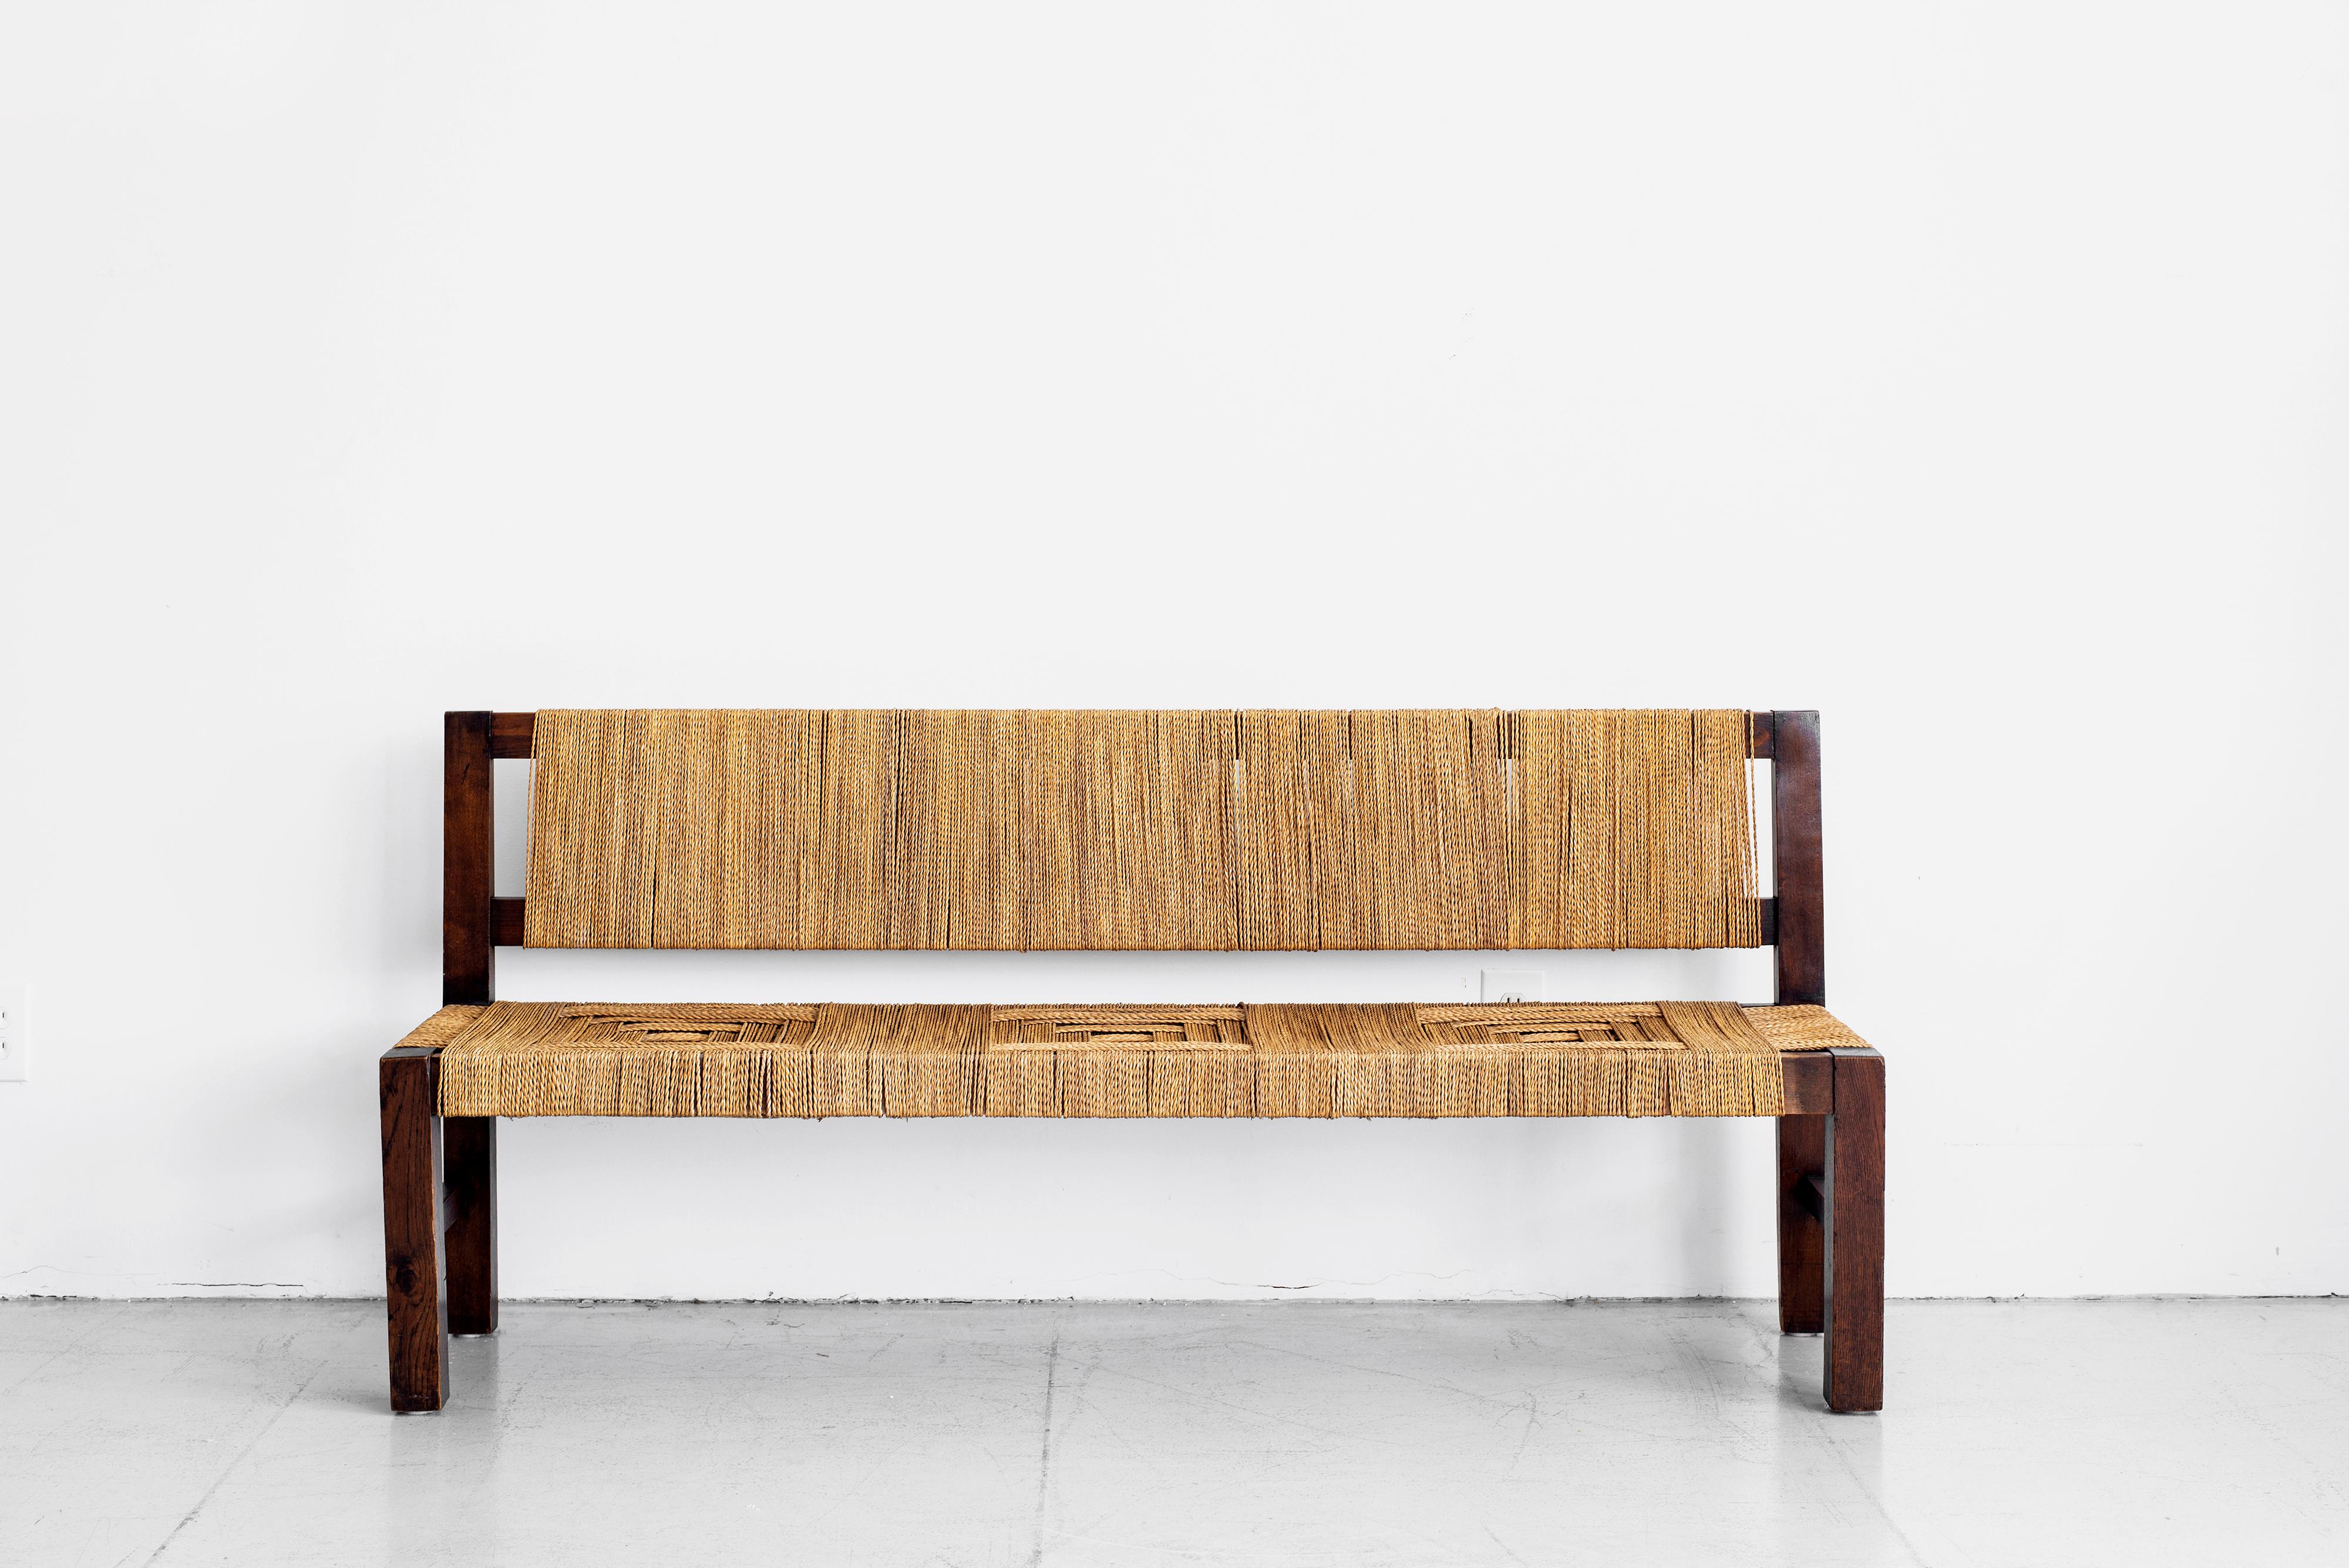 Stunning bench by Francis Jourdain with patterned braided rushed seat and blackened beechwood frame. Eye-catching piece.